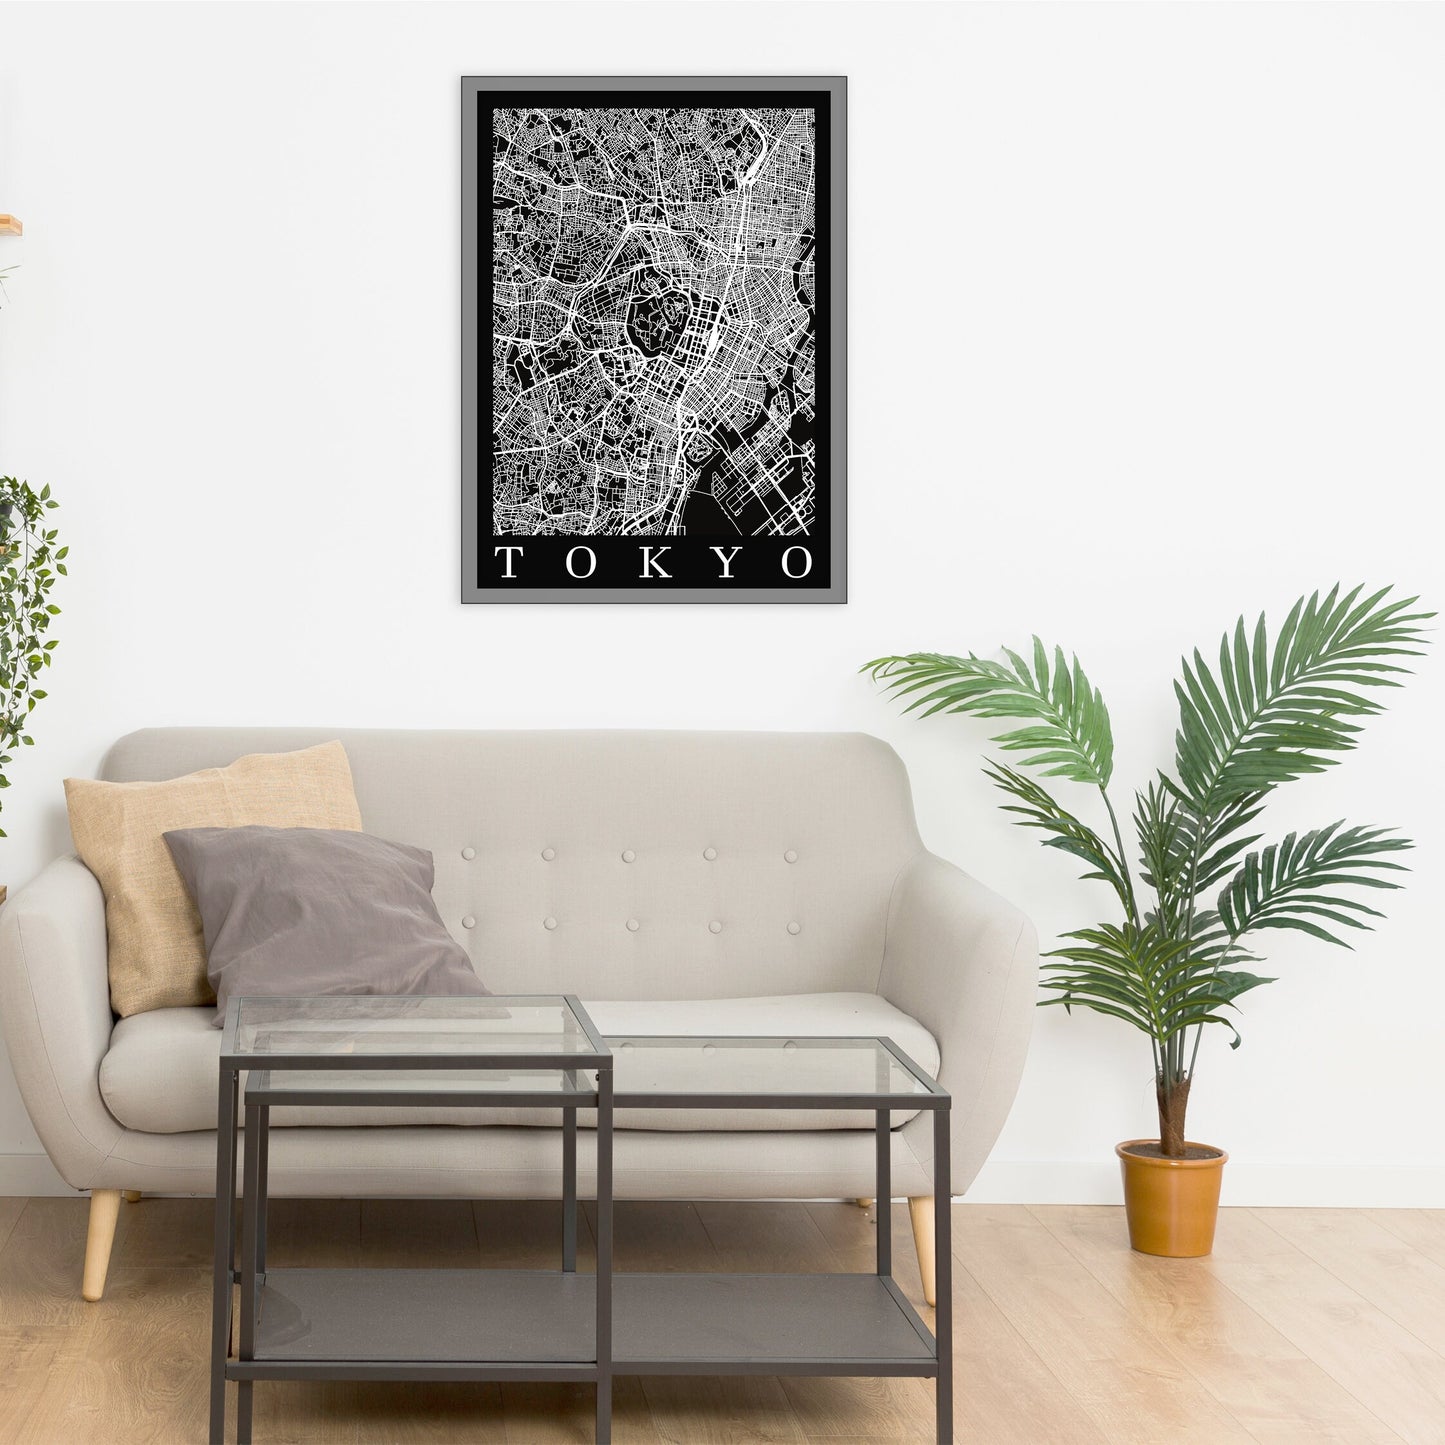 City map of TOKYO - Home Decor - Wall decor -Office map - Travel map- Print map -Poster city map - Tokyo map- GeoGIS Studio -Tokyo black map